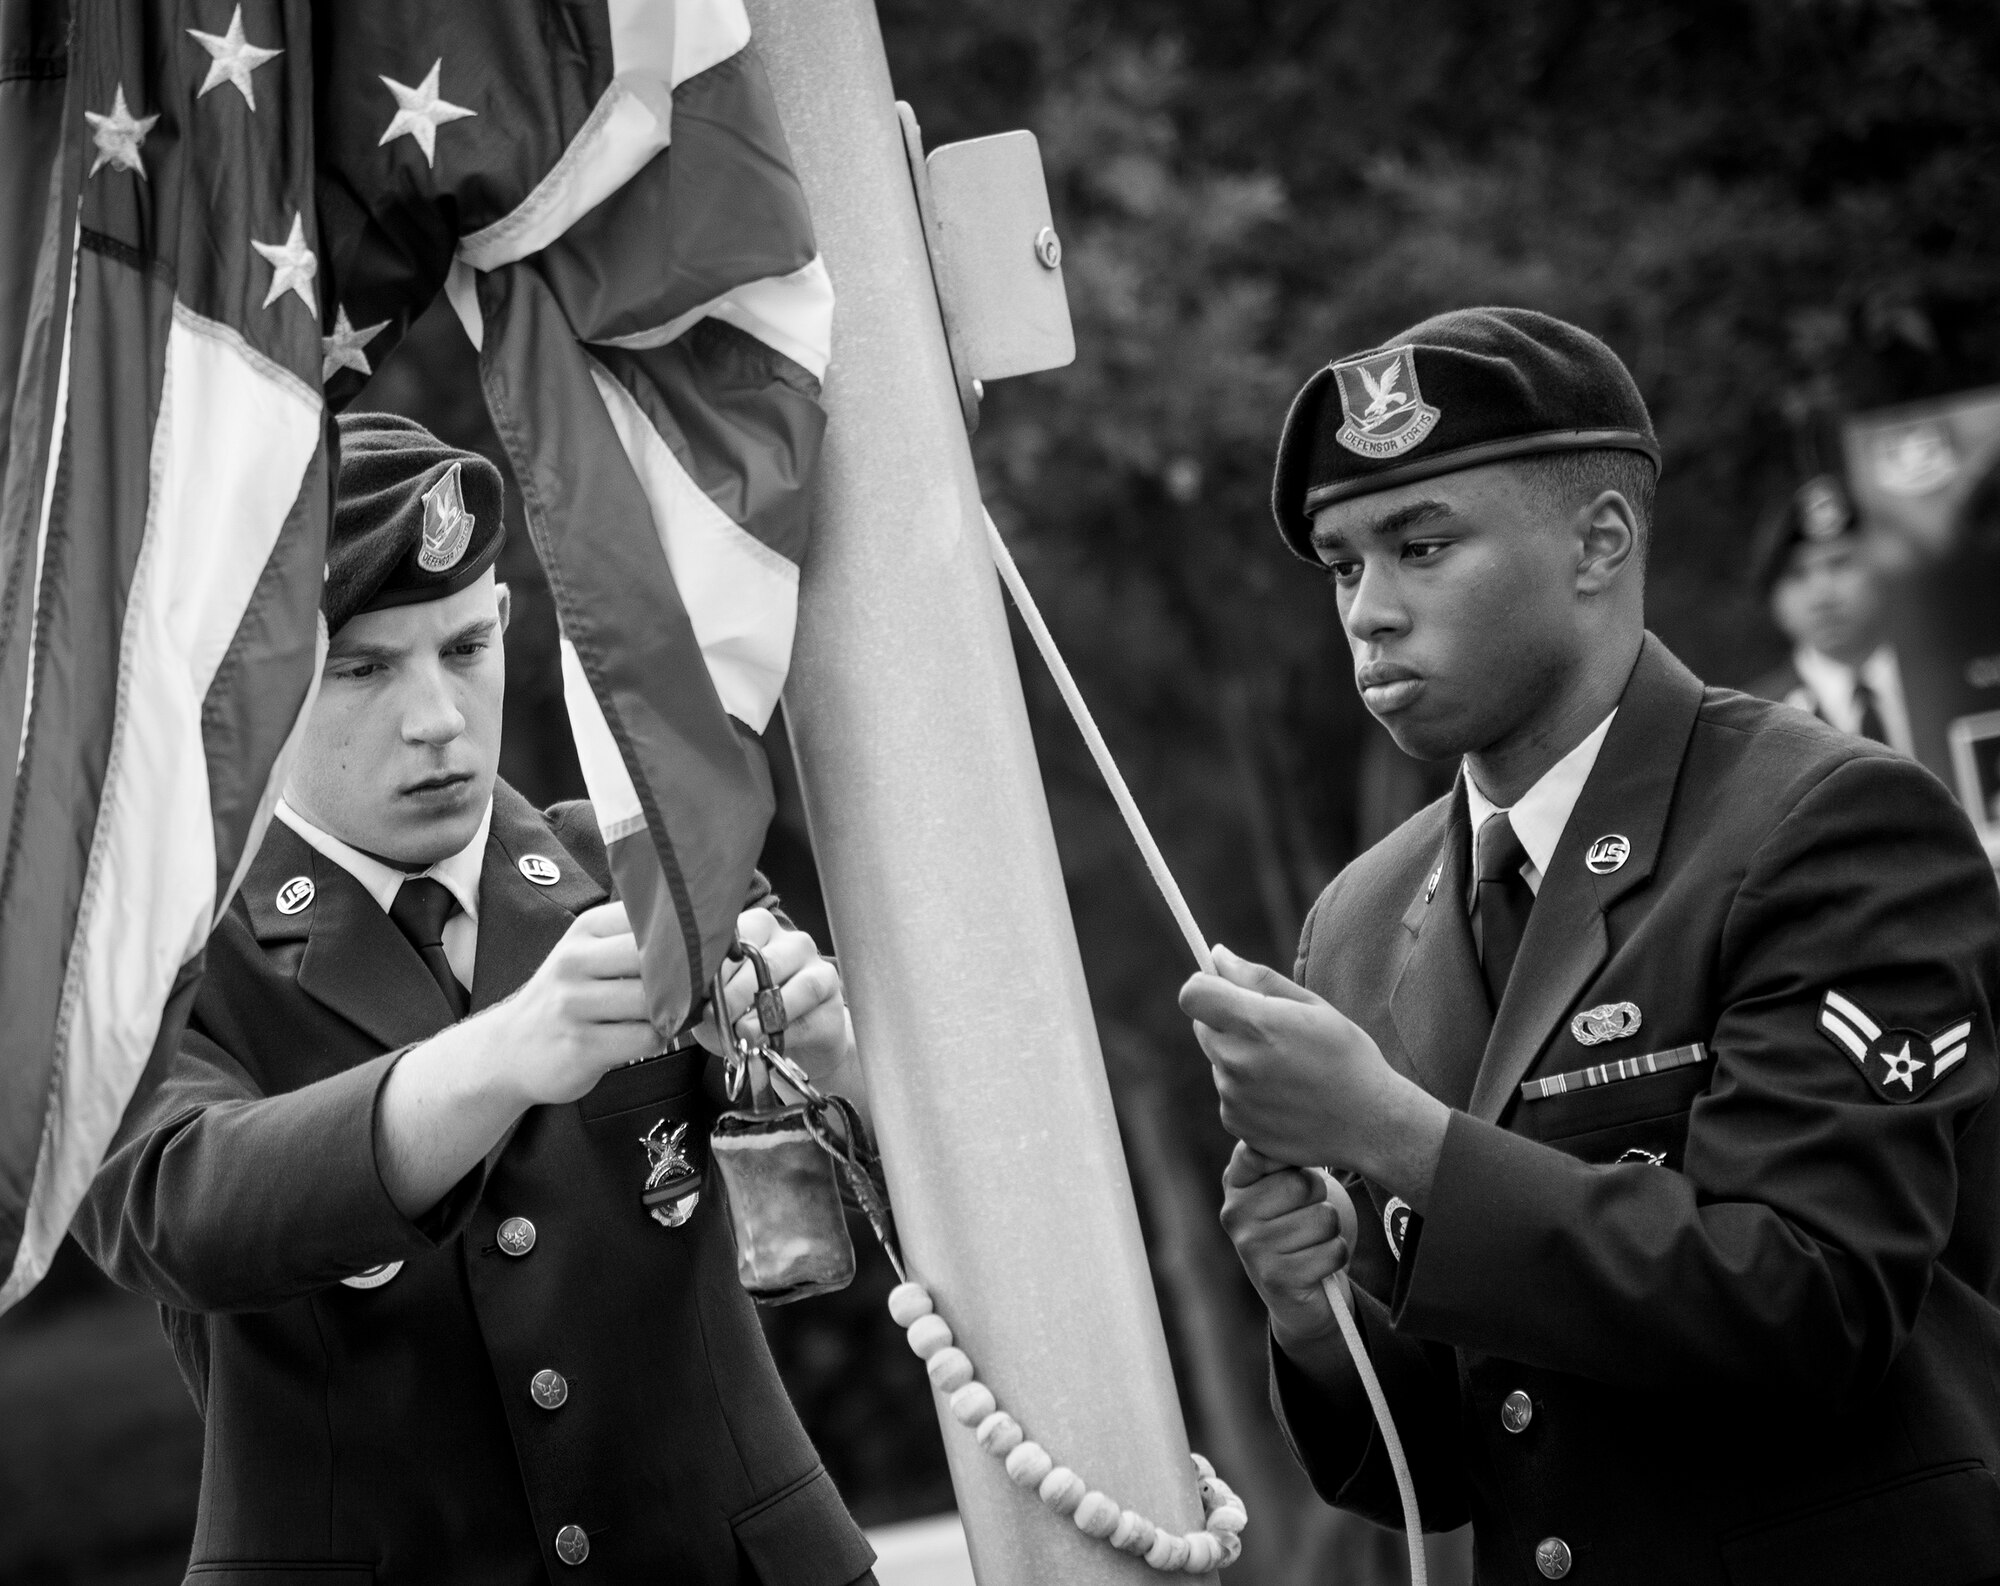 Airmen 1st Class Michael Garayalde and Tiras Harris,96th Security Forces Squadron, prepare to raise the flag at the opening ceremony of Police Week at Eglin Air Force Base, Fla., May 15.  The ceremony was a gathering of security forces personnel for a formation and reveille ceremony performed at the All Wars Memorial.  Police Week activities will happen throughout the week and will close with security forces Airmen performing a retreat ceremony at Bldg. 1.  (U.S. Air Force photo/Samuel King Jr.)